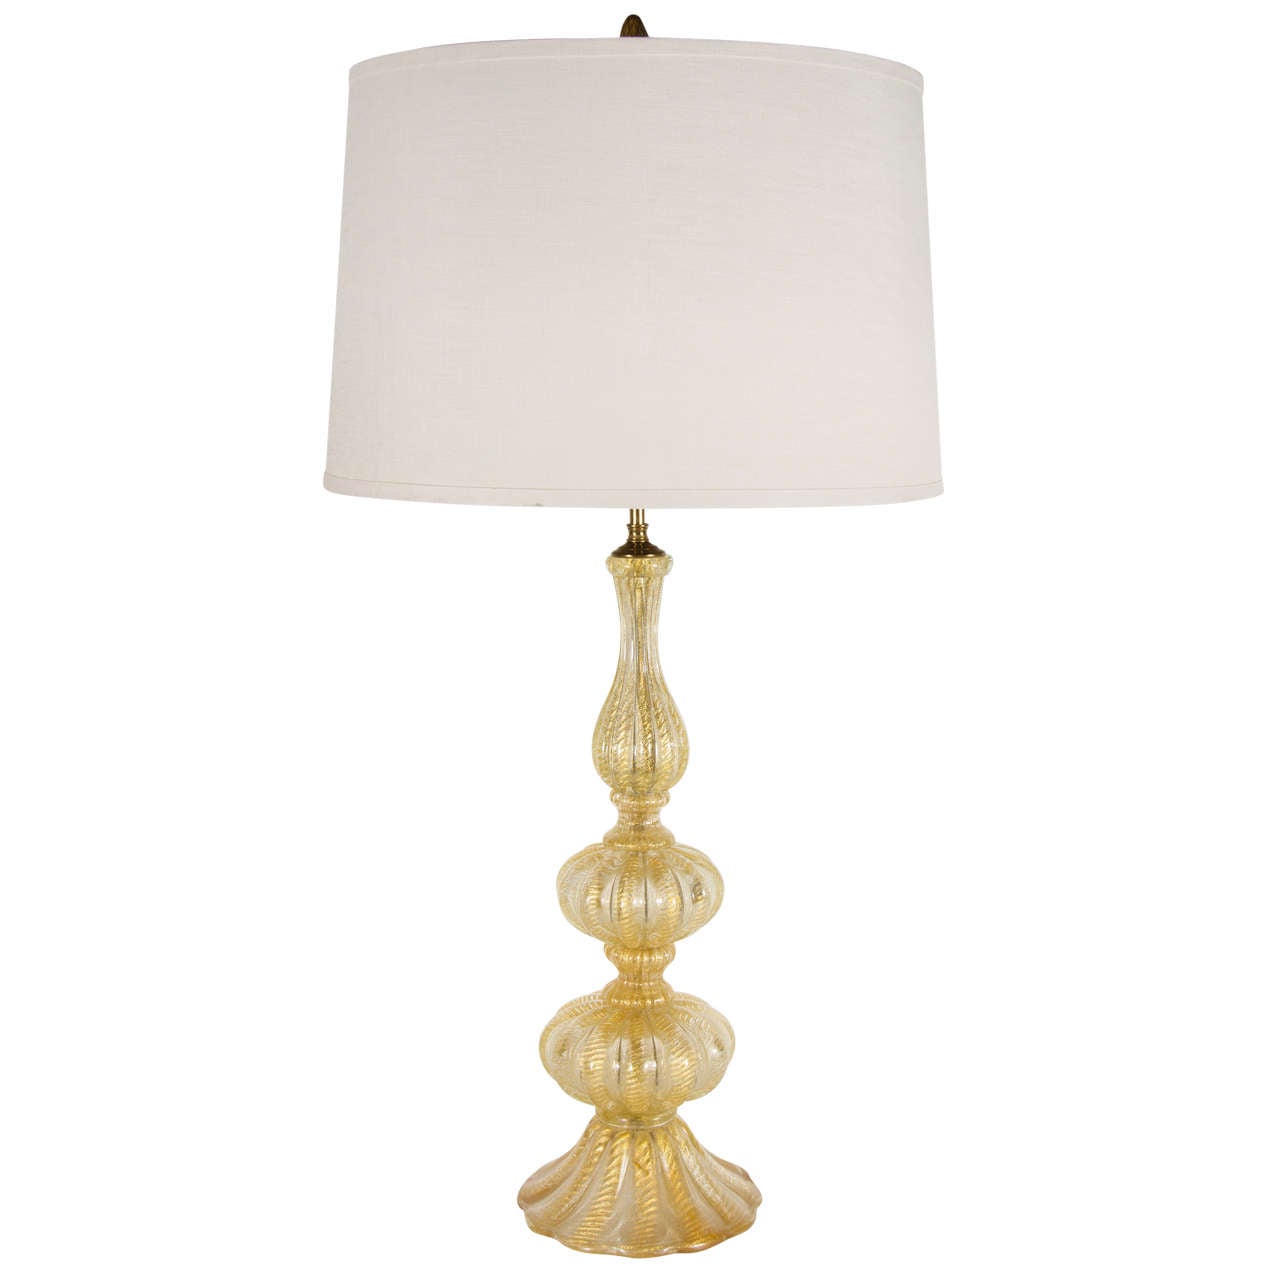 Mid-Century Modern Hand-Blown Table Lamp w/ 24kt Gold Flecks by Barovier e Toso